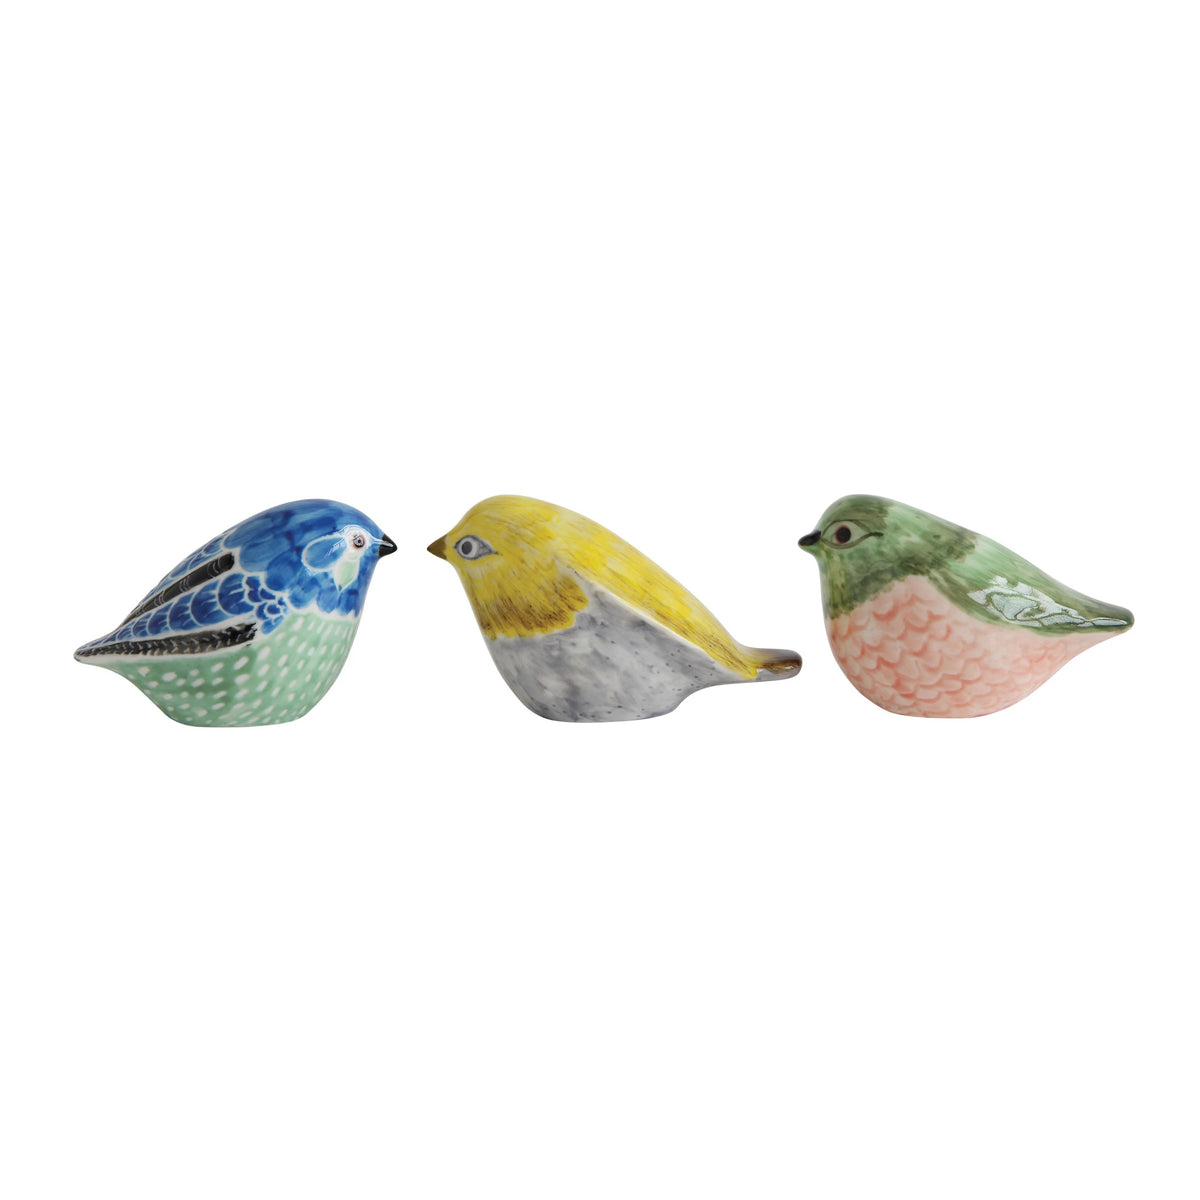 Playful and charming, these beautifully hand-painted stoneware birds add character to any space. Choose from three vibrant colors that will surely brighten up any room. Each measures 3.25&quot;L x 2.5&quot;H.